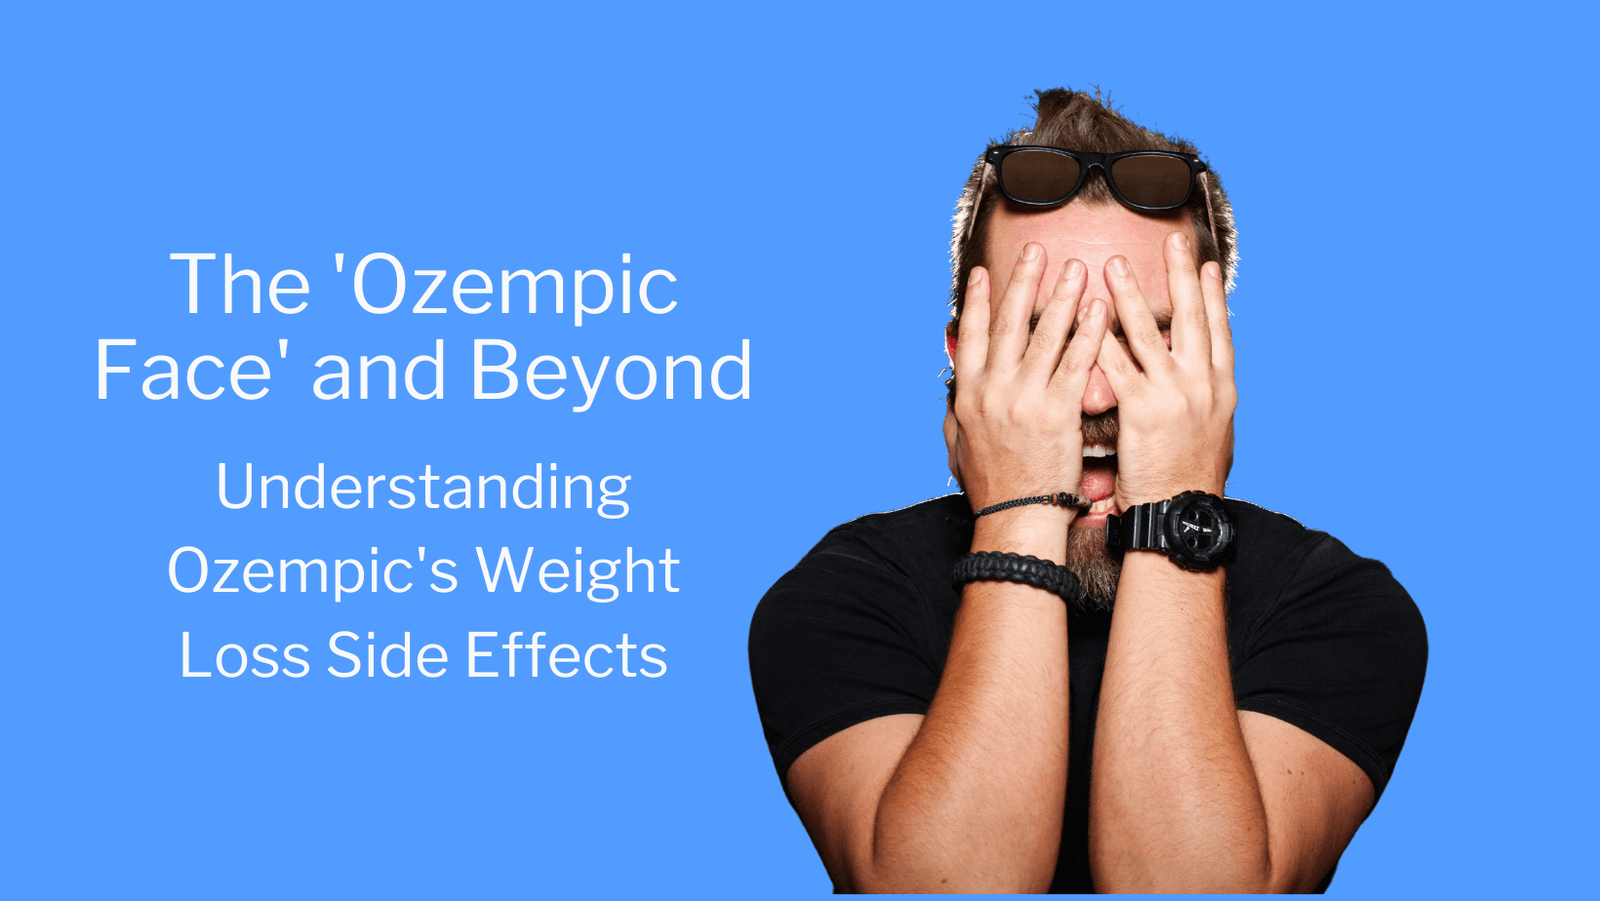 Understanding Ozempic's Weight Loss Side Effects: The 'Ozempic Face' and Beyond - BioCoach